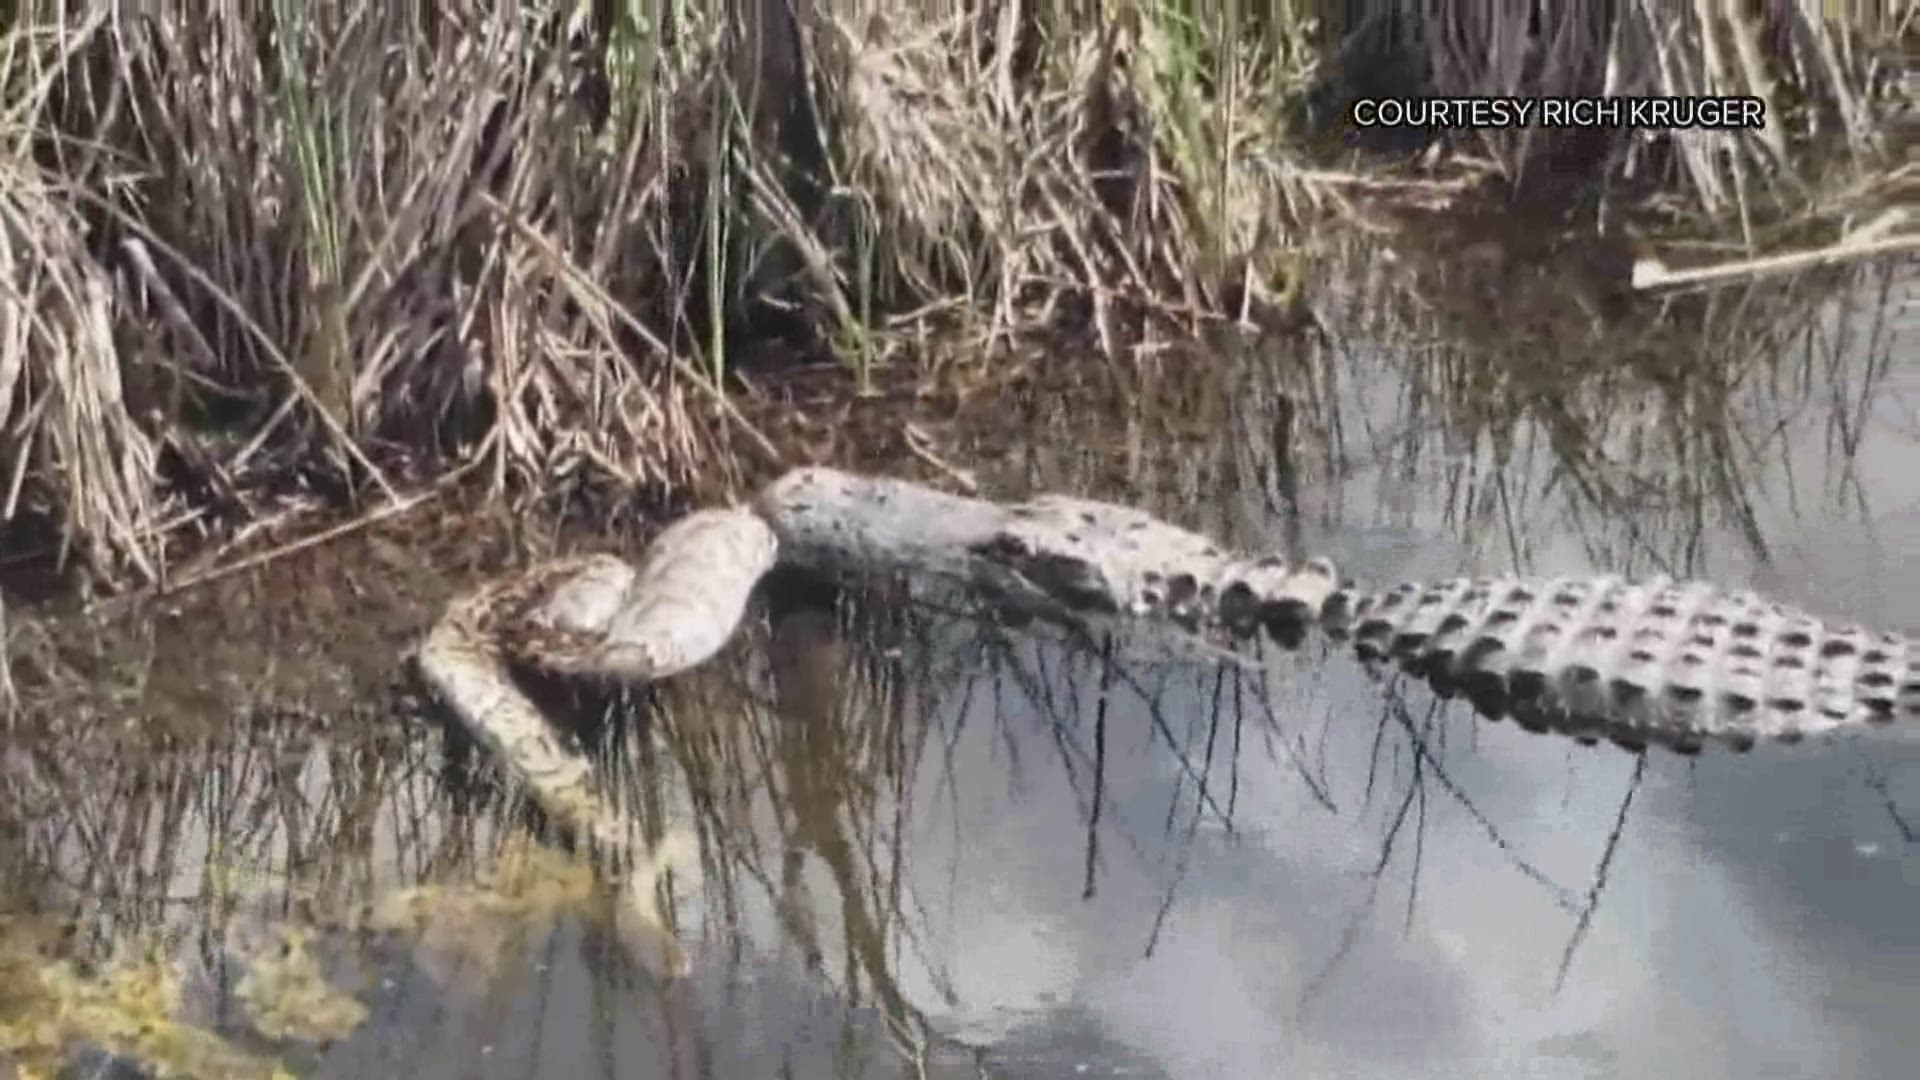 Rich Kruger caught this gator taking on a python in the Everglades.